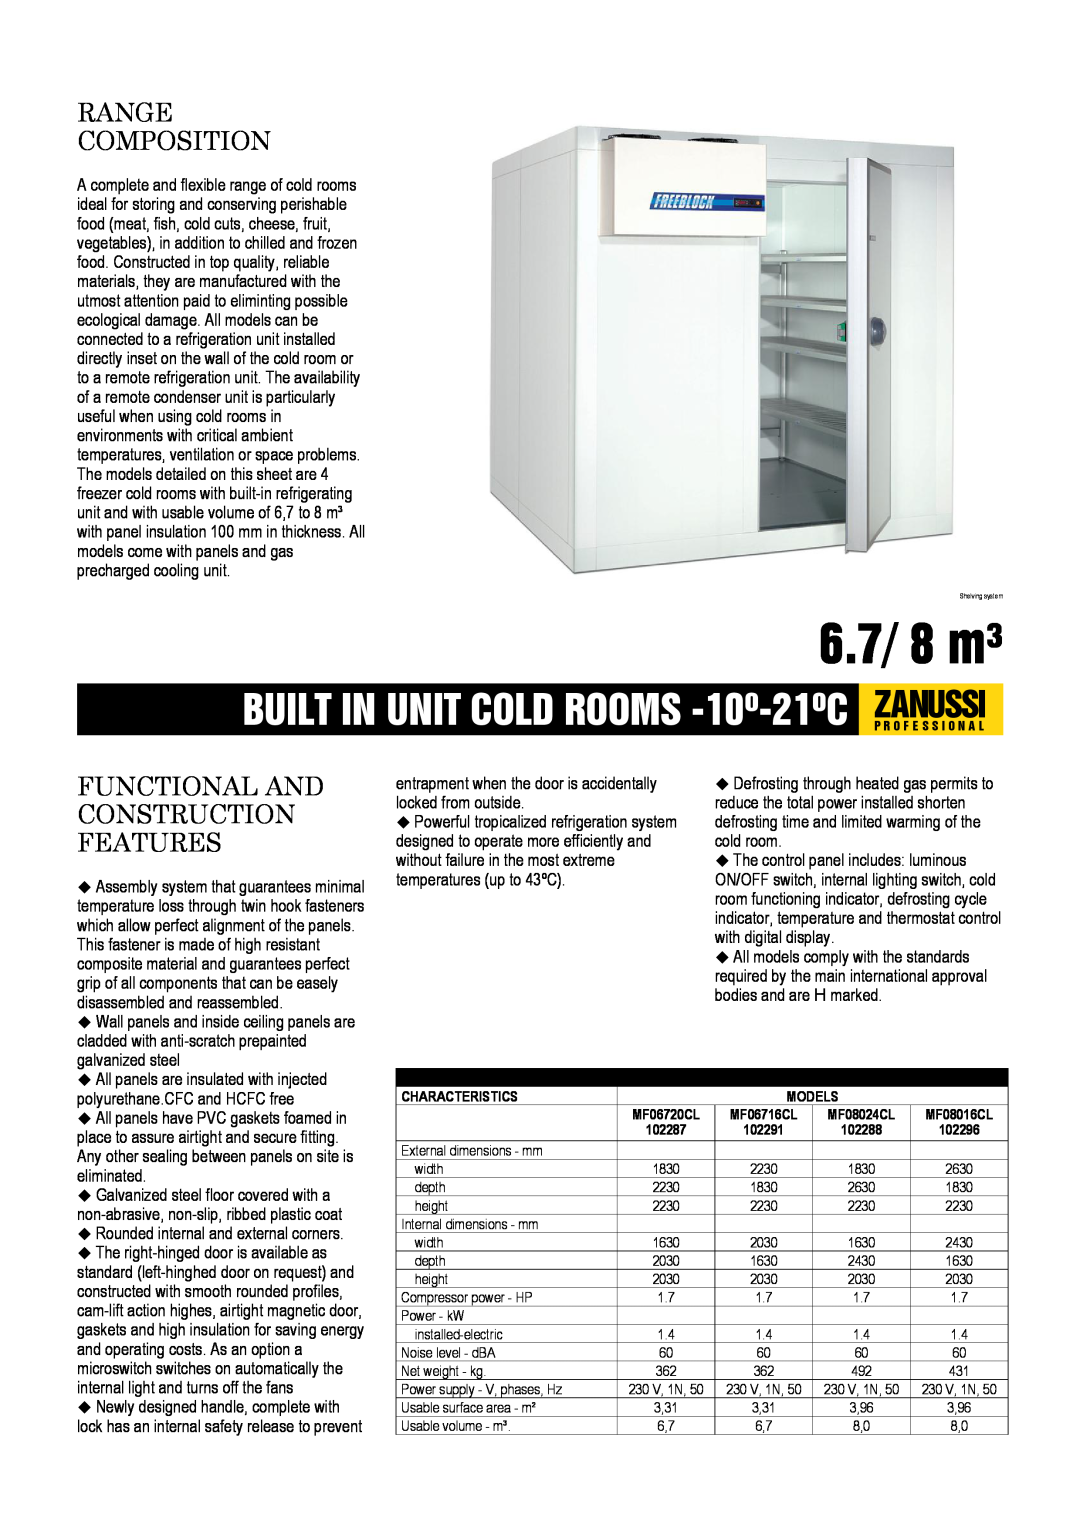 Zanussi MF08024CL, MF08016CL, MF06716CL dimensions 6.7/ 8 m³, Range Composition, Functional And Construction Features 